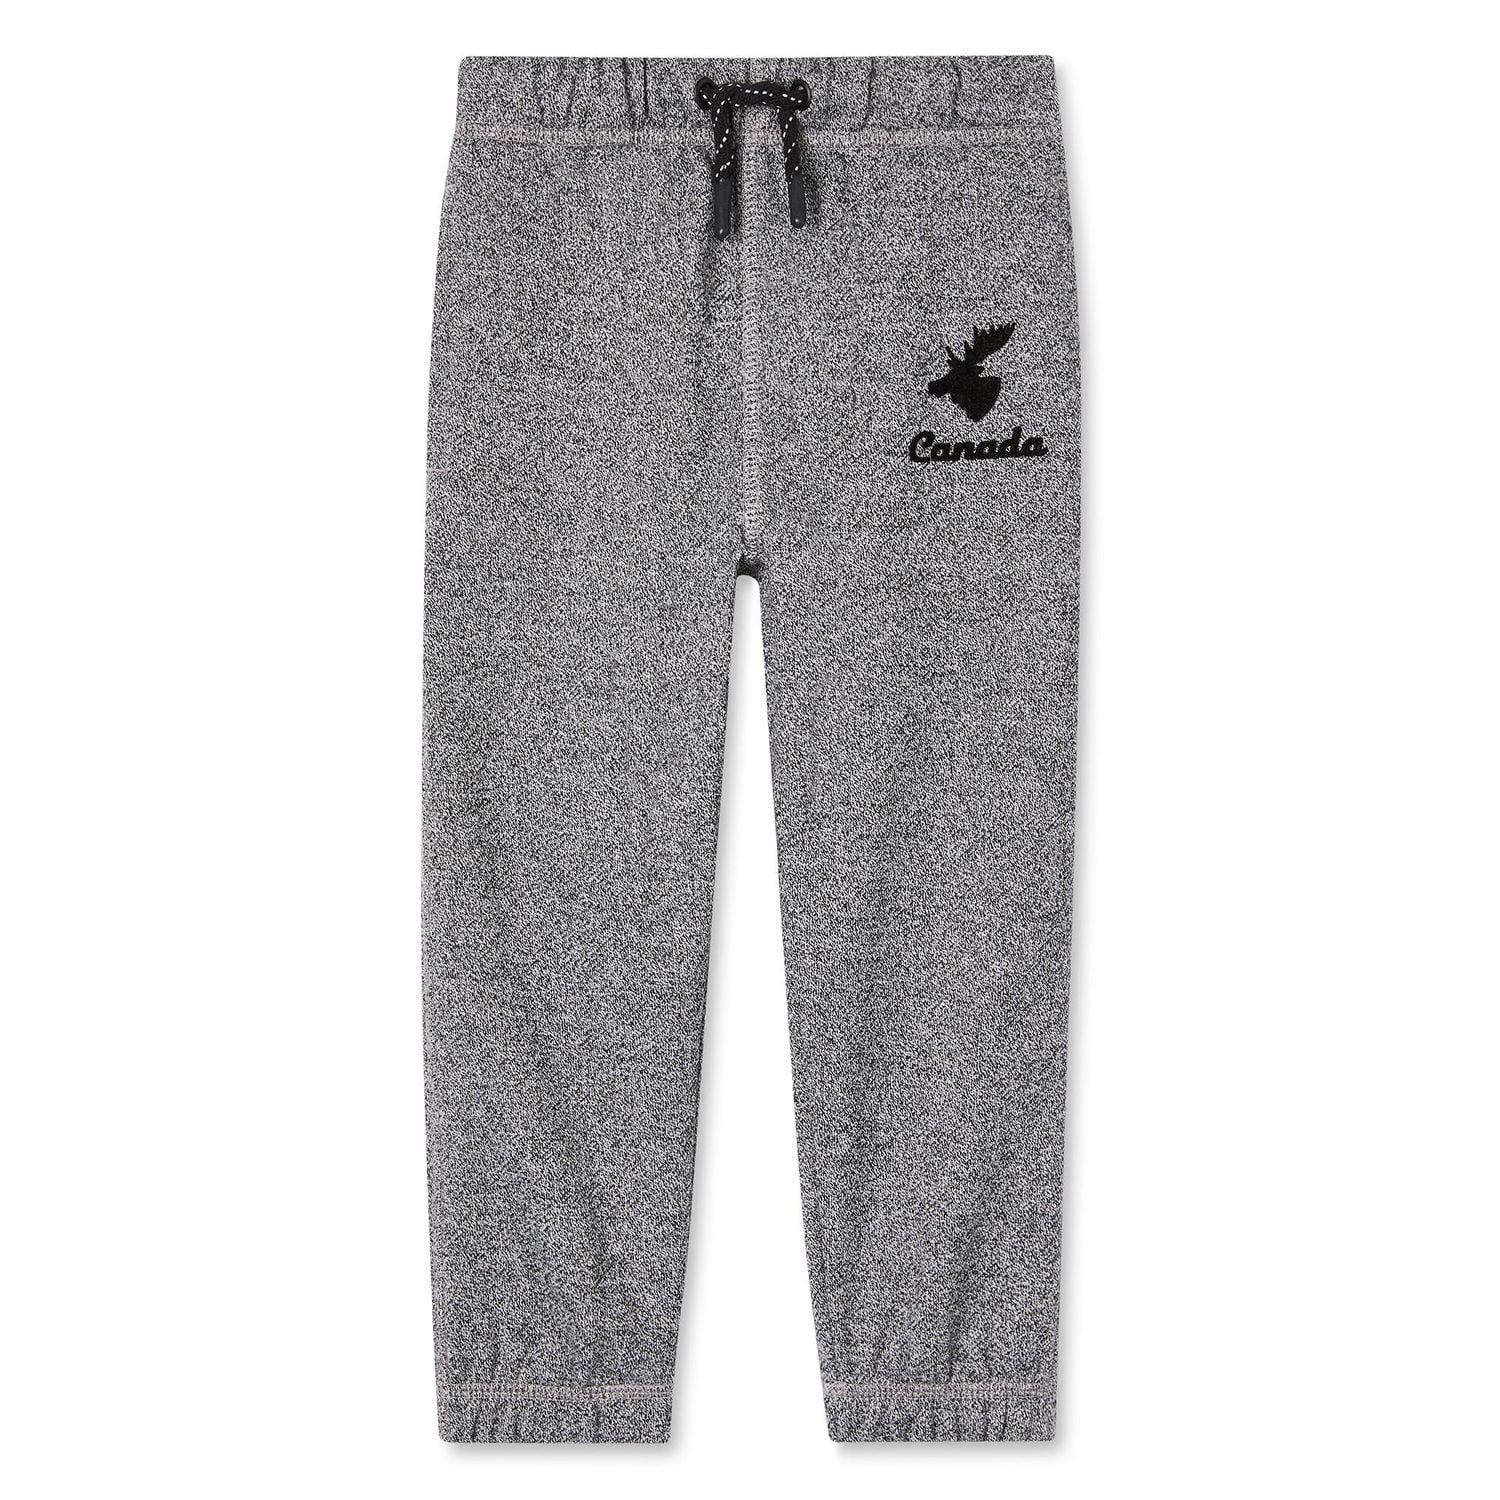 Canadiana Adult Gender Inclusive Jogger, Sizes XS-2XL 